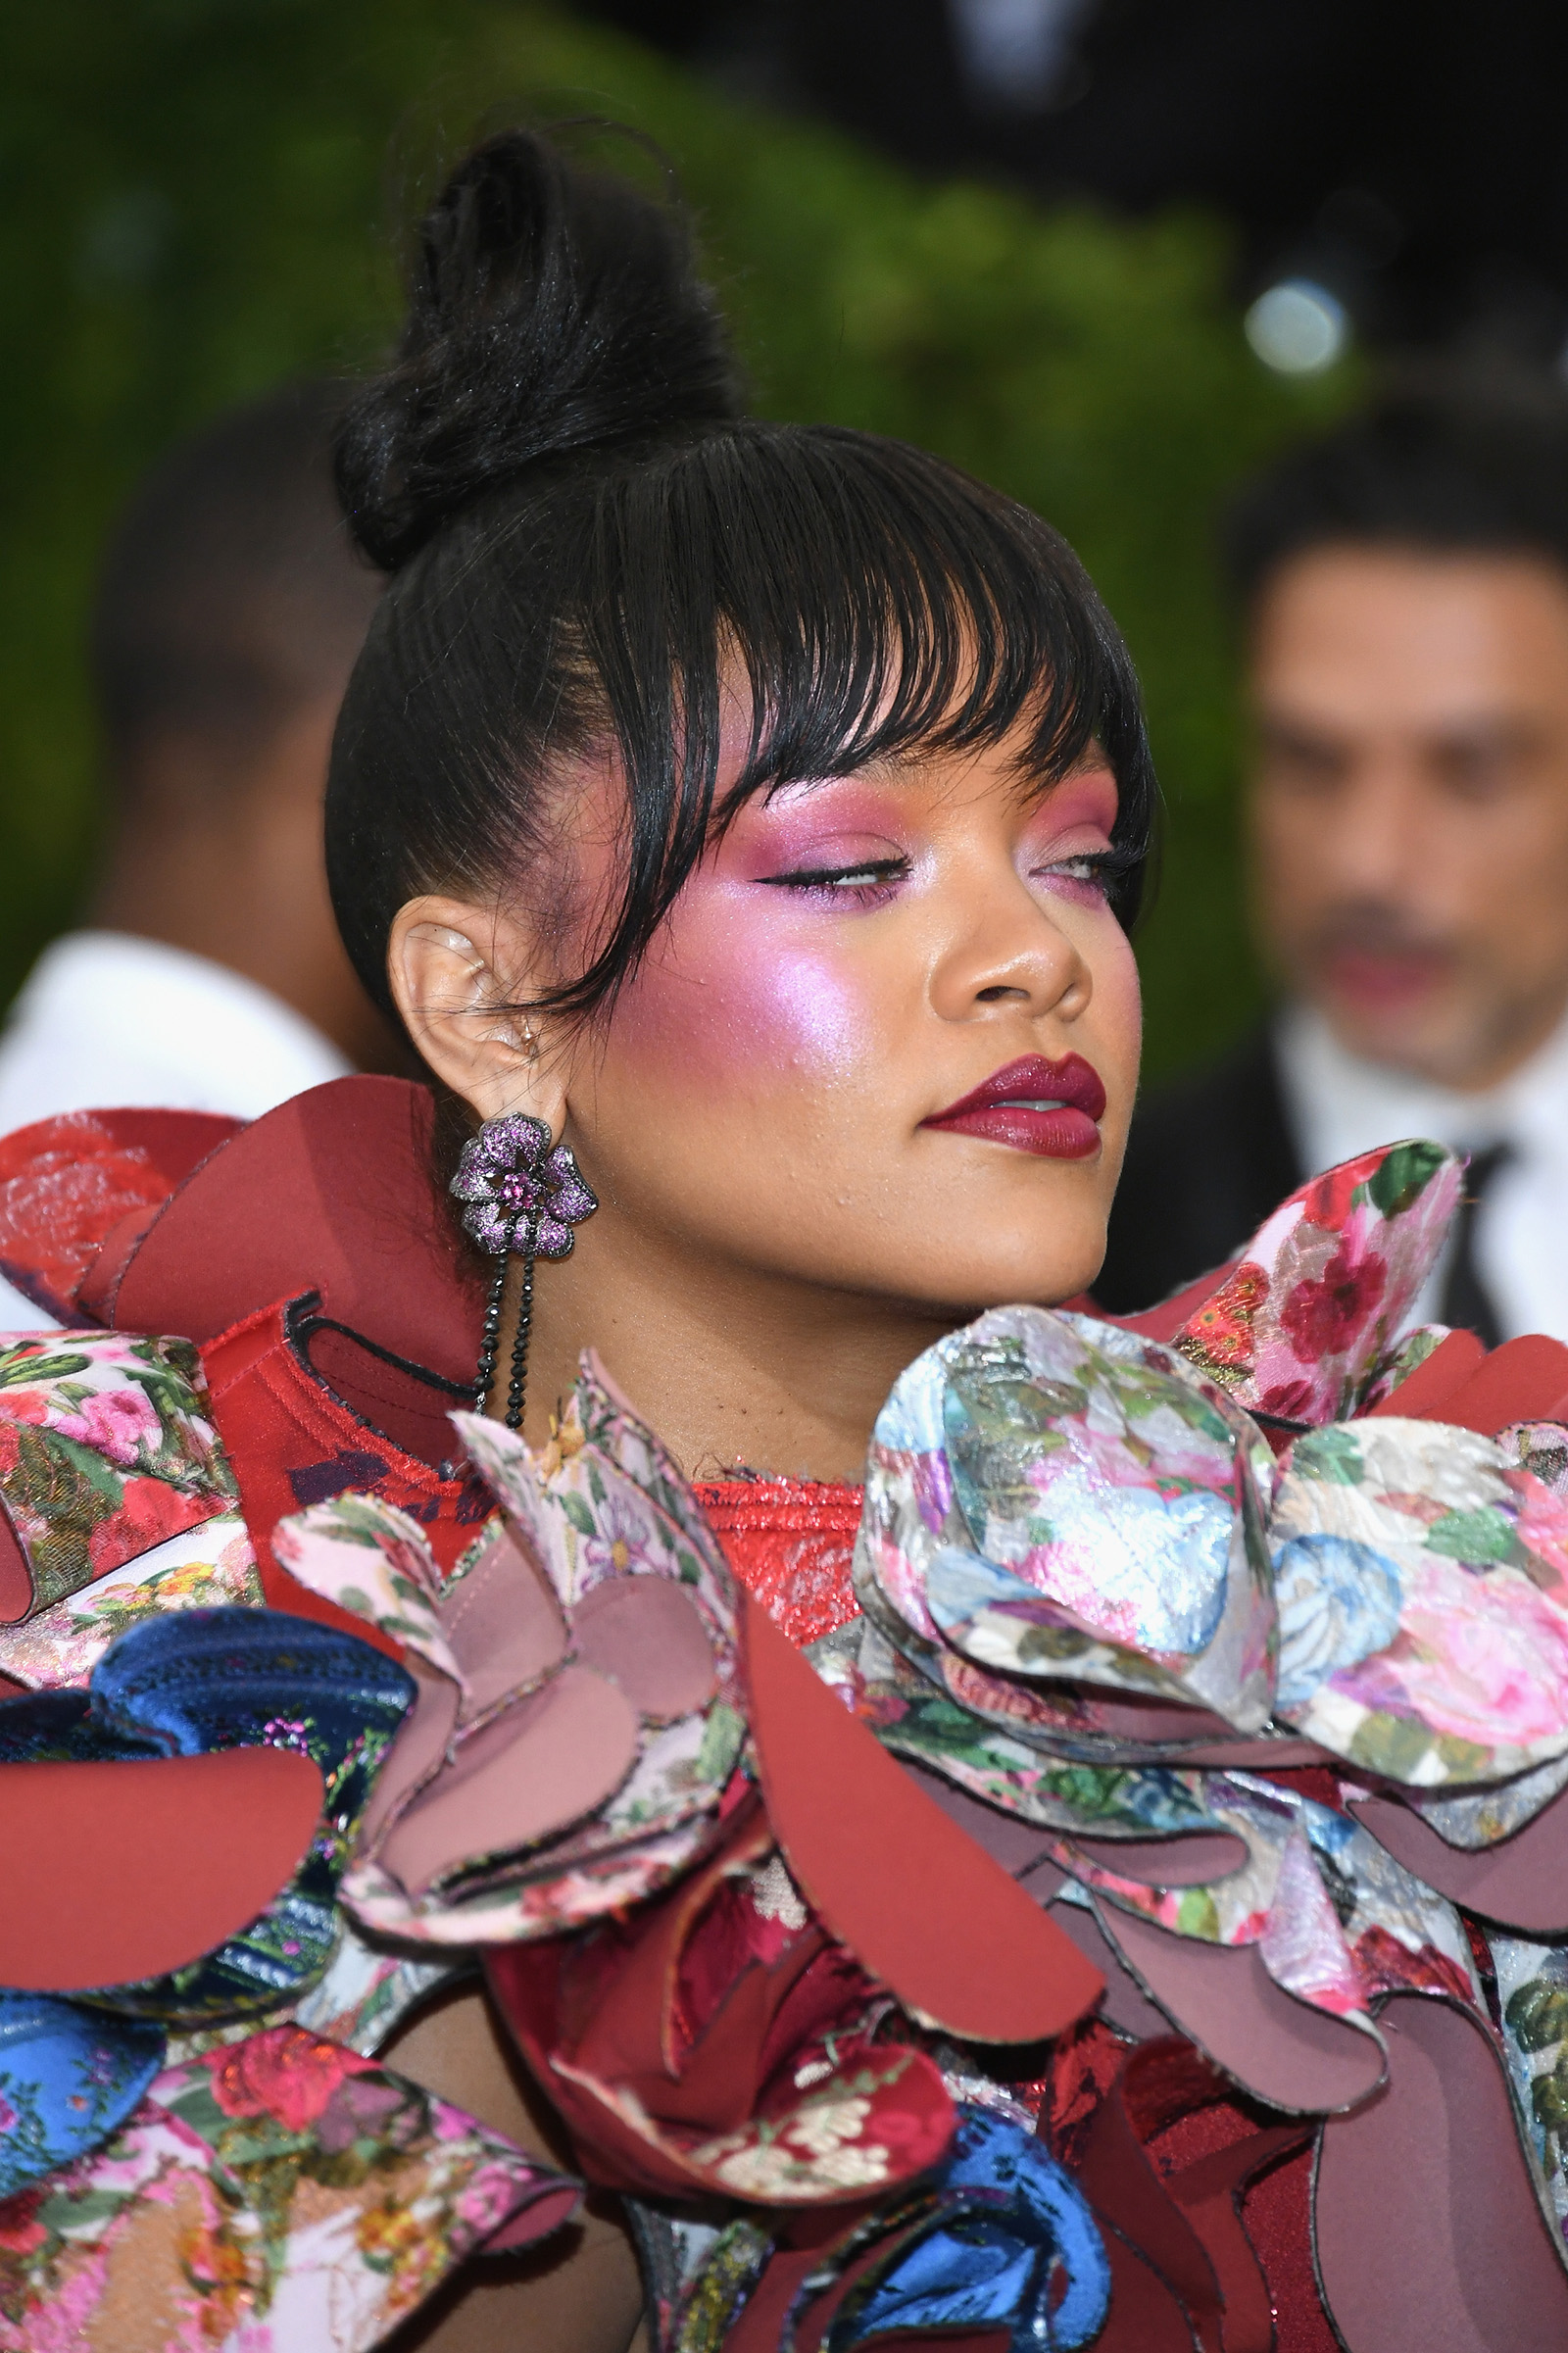 The-Most-Iconic-Celebrity-Beauty-Looks-Worth-Recreating-Rihanna